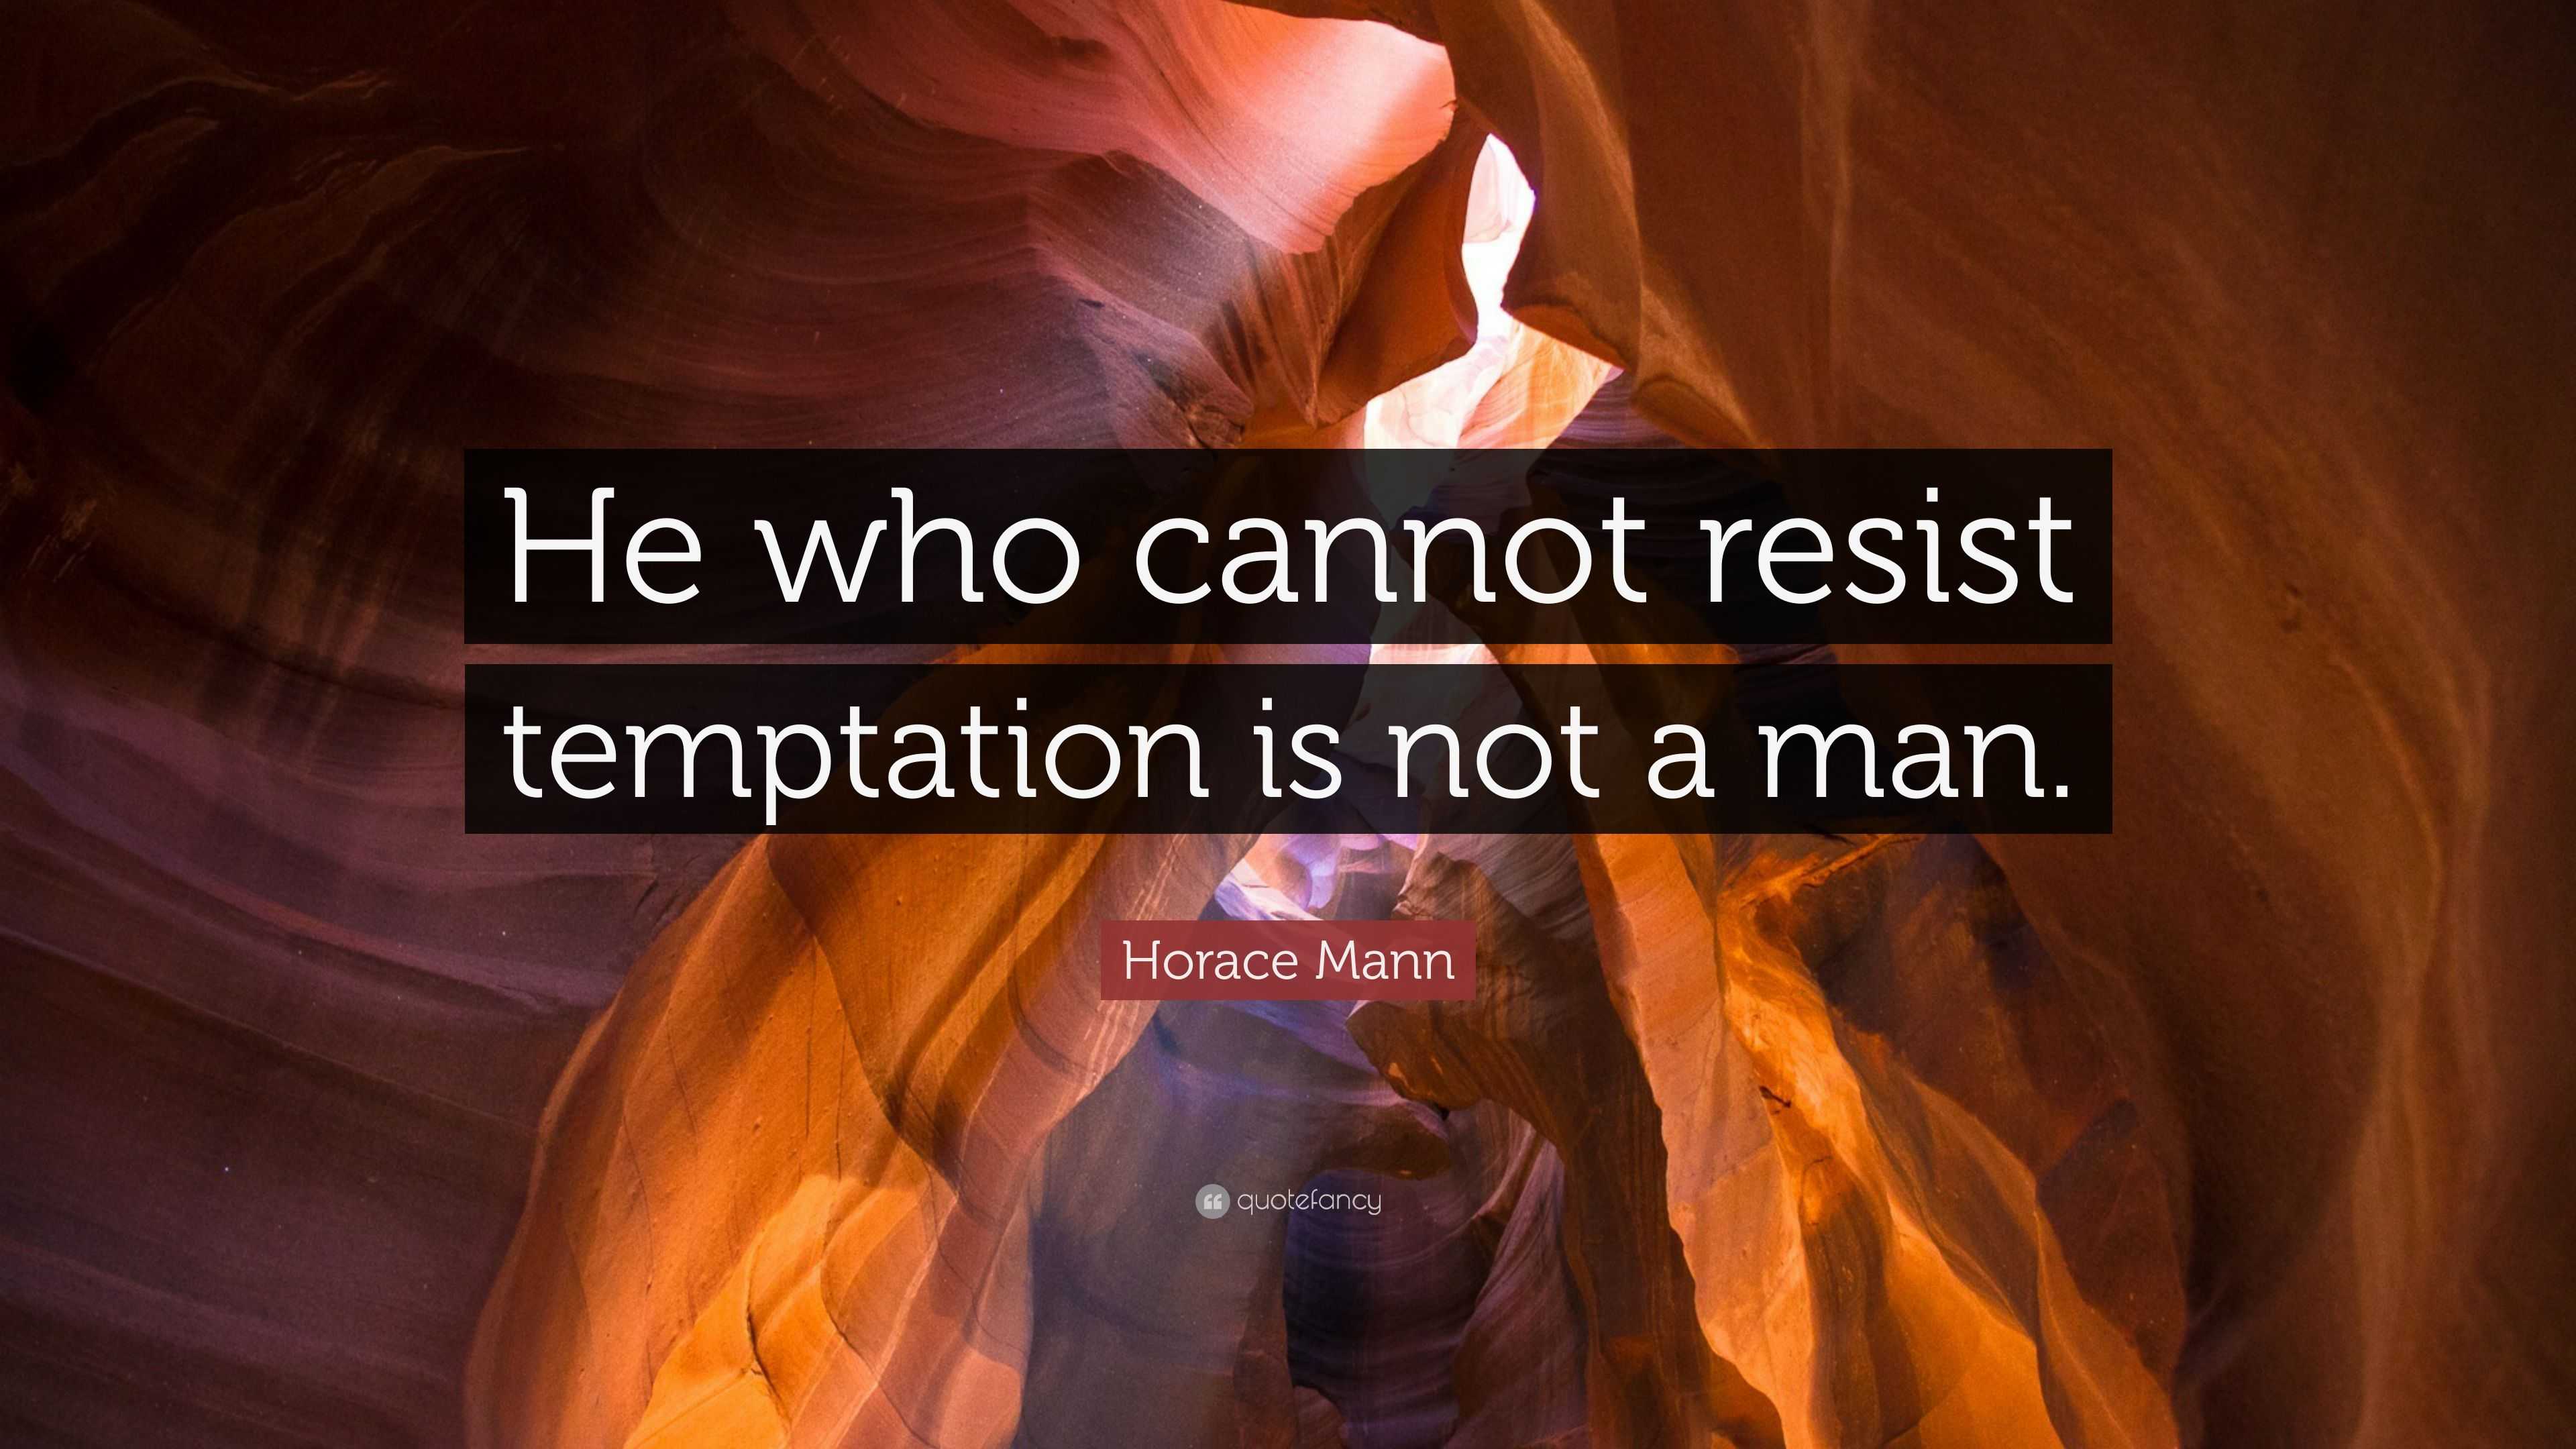 Horace Mann Quote: “He who cannot resist temptation is not a man.”